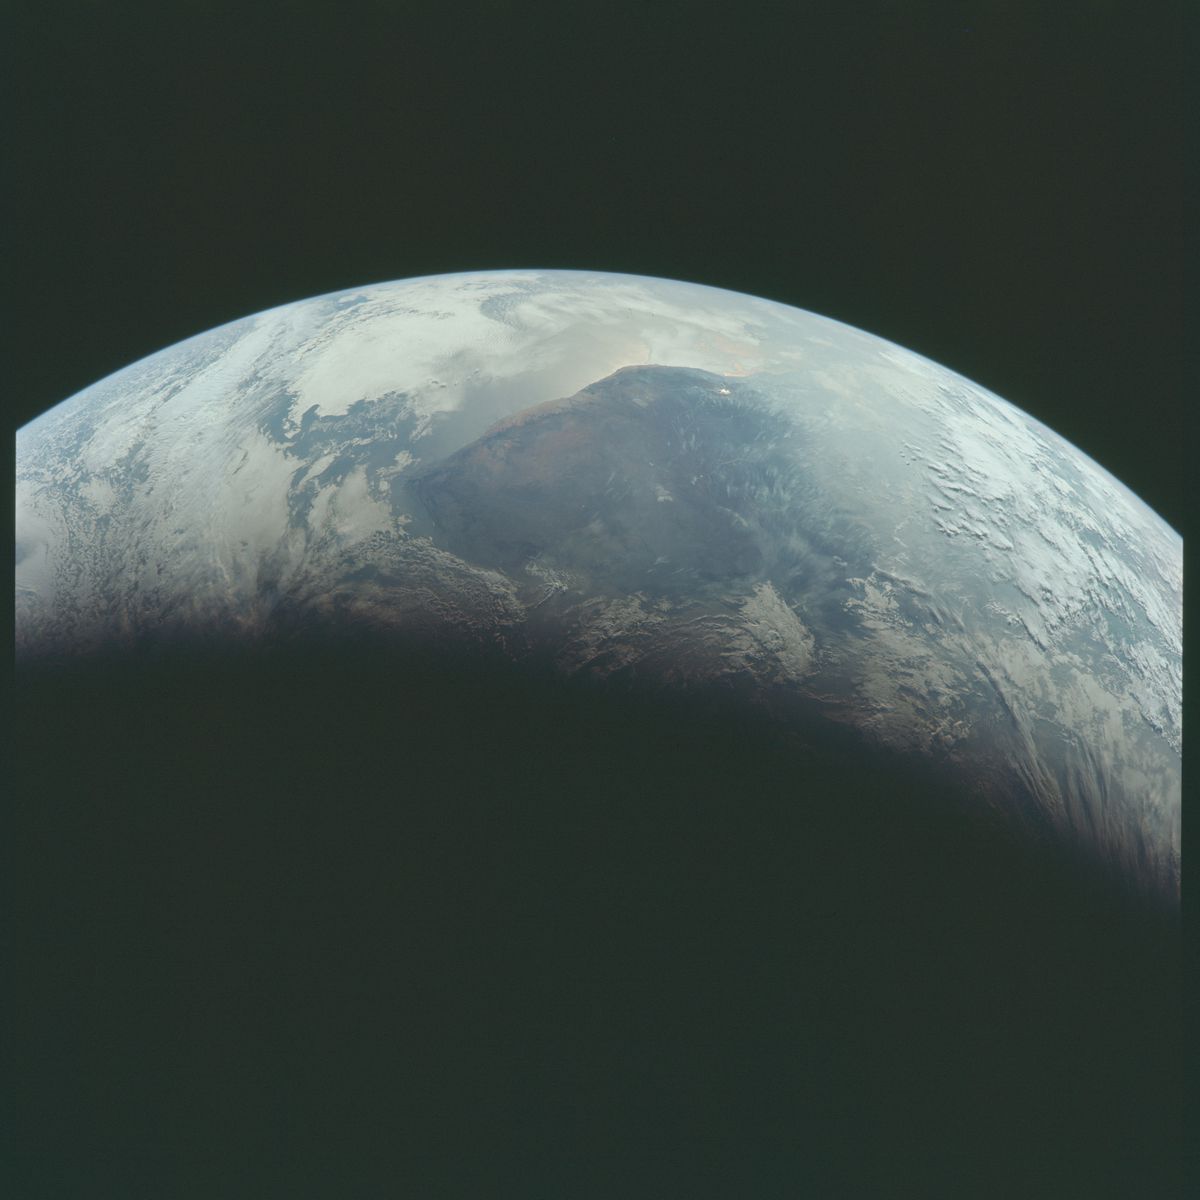 The Earth as seen from Apollo 11